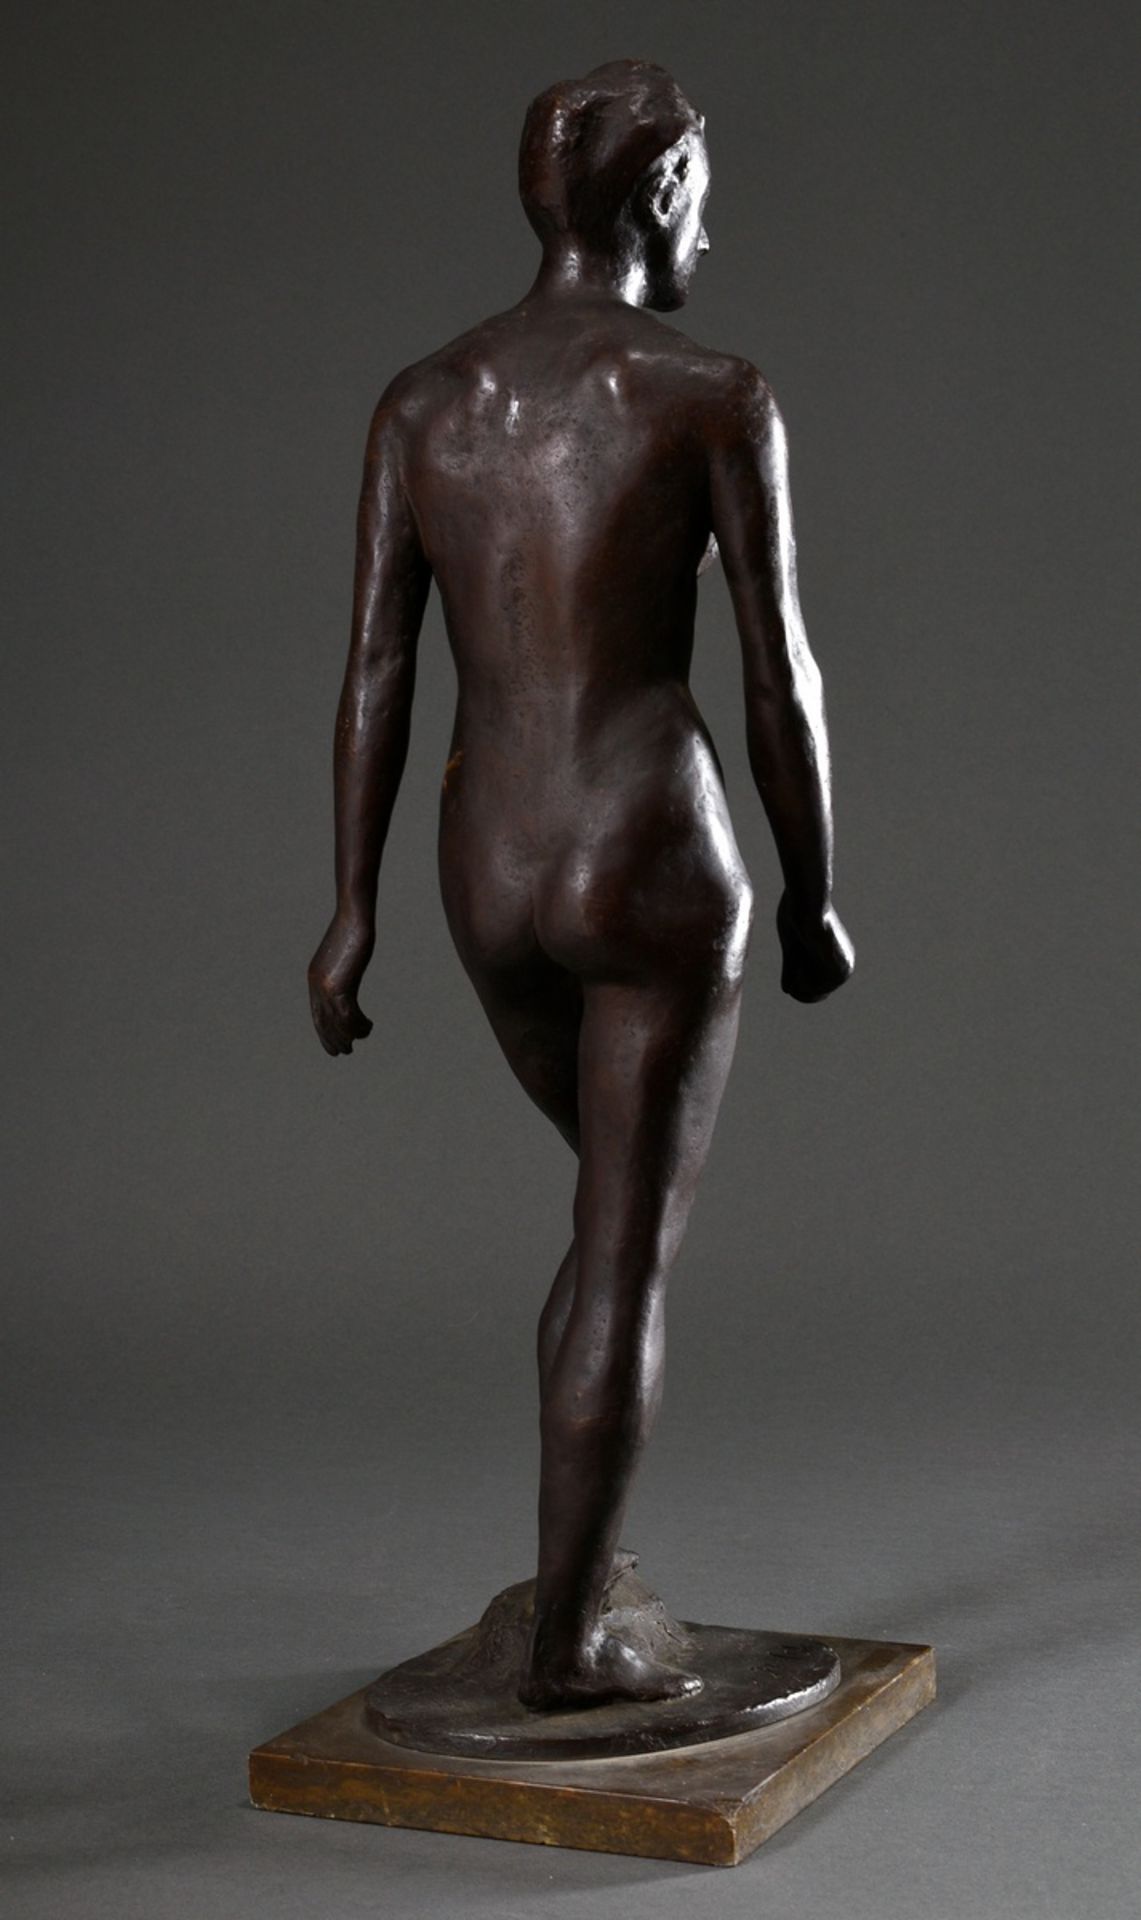 Scheibe, Richard (1879-1964) "Ascending" 1945, bronze, dark patina, with marble base, sign. on the  - Image 4 of 11